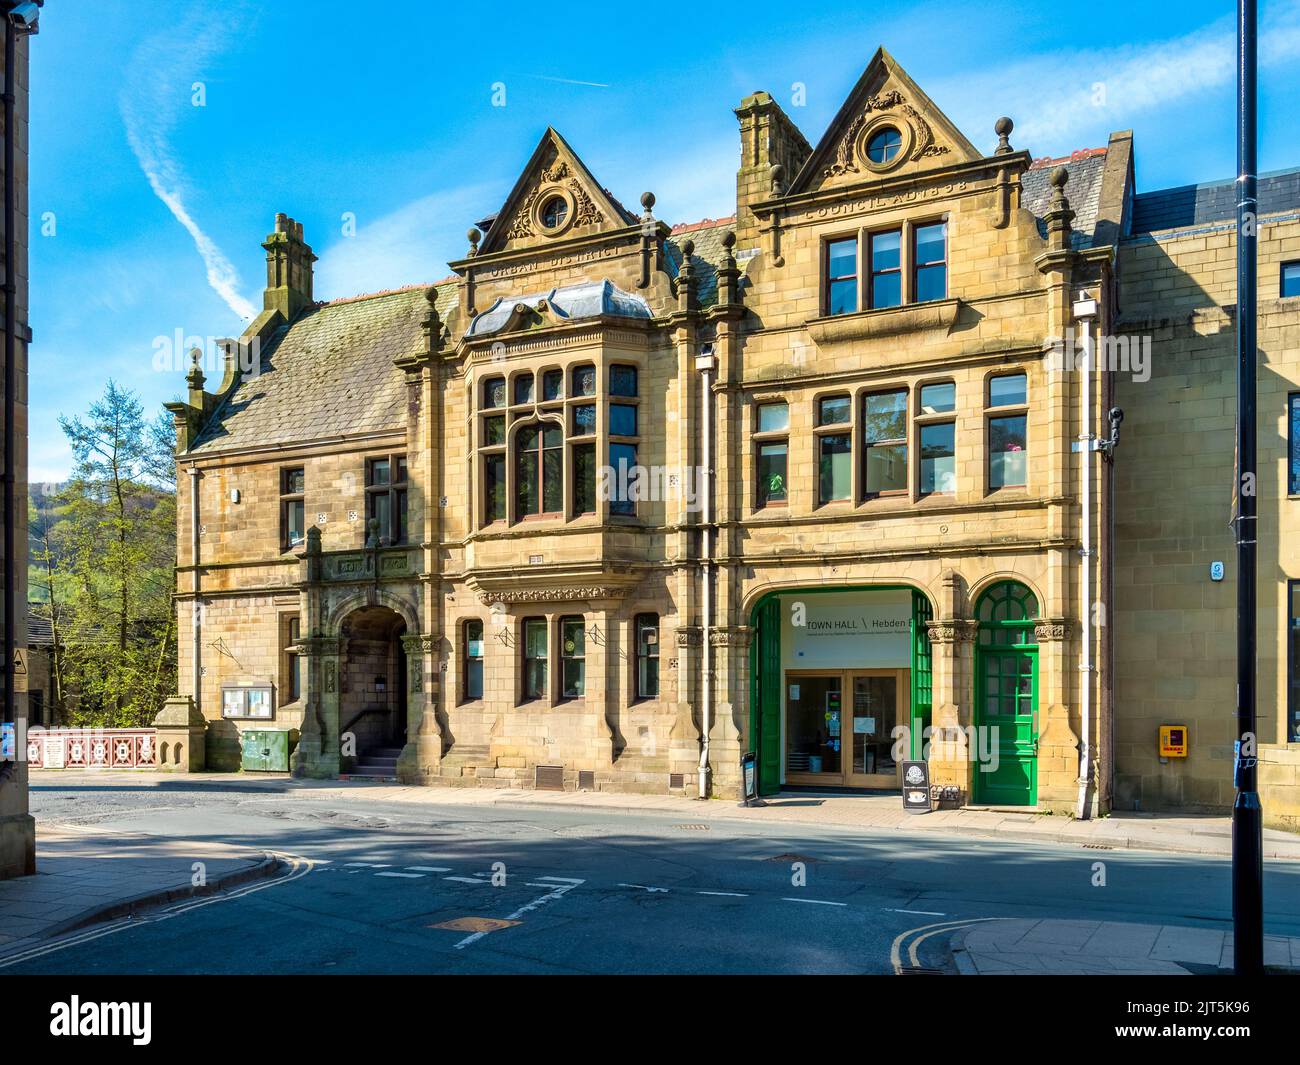 30 April 2022: Hebden Bridge, West Yorkshire, UK - Hebden Bridge Town Hall, a Grade II Listed Building, dating from 1898. Stock Photo